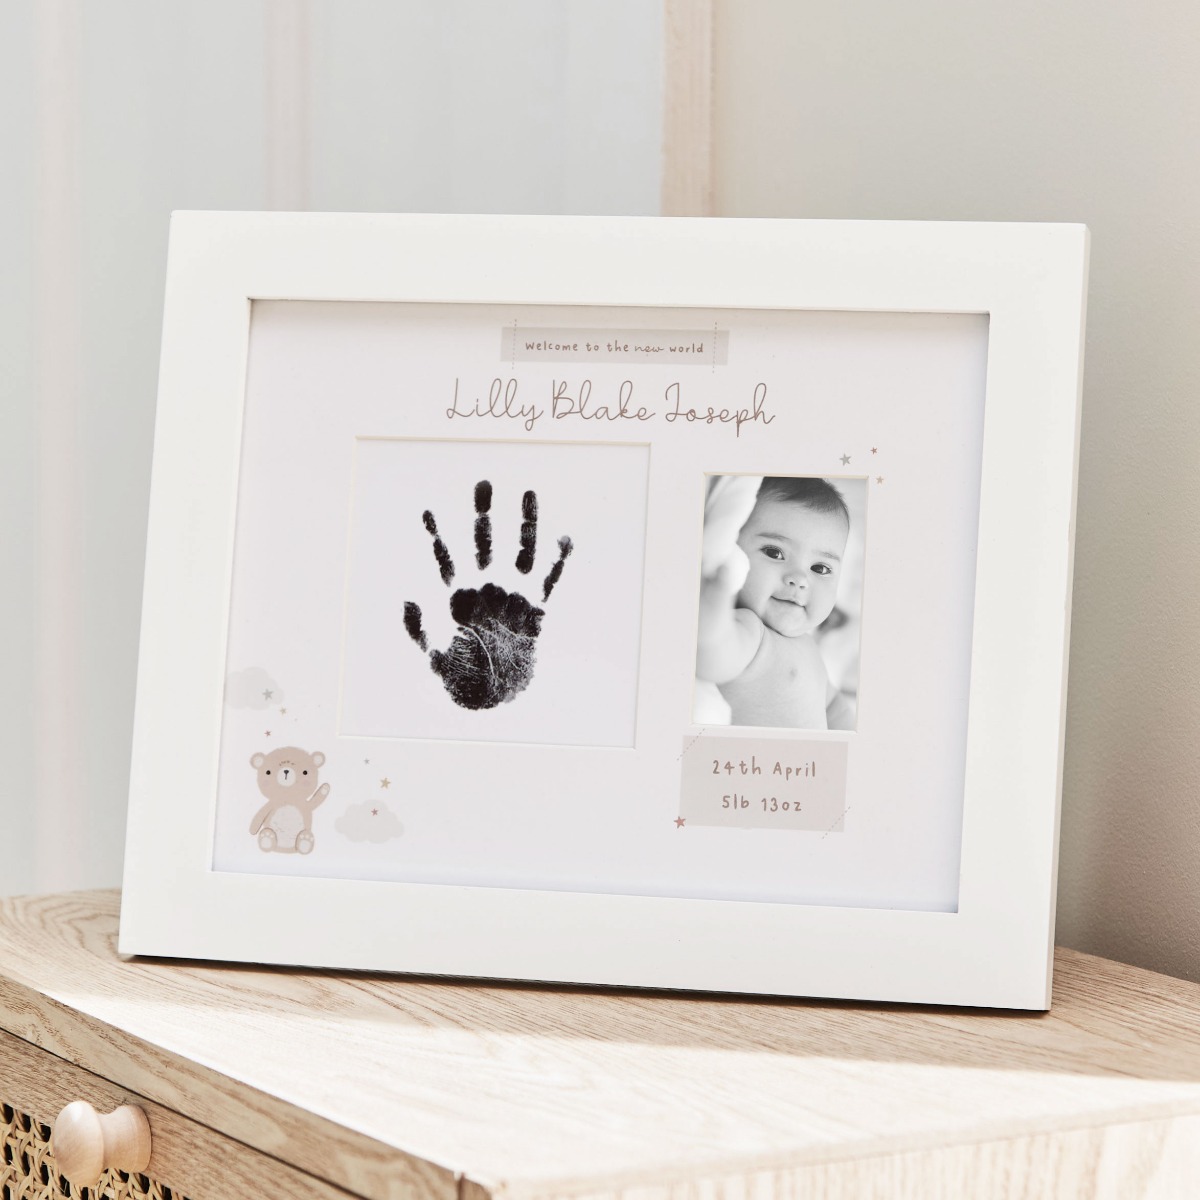 Personalised Welcome to the World Handprint Photo Frame